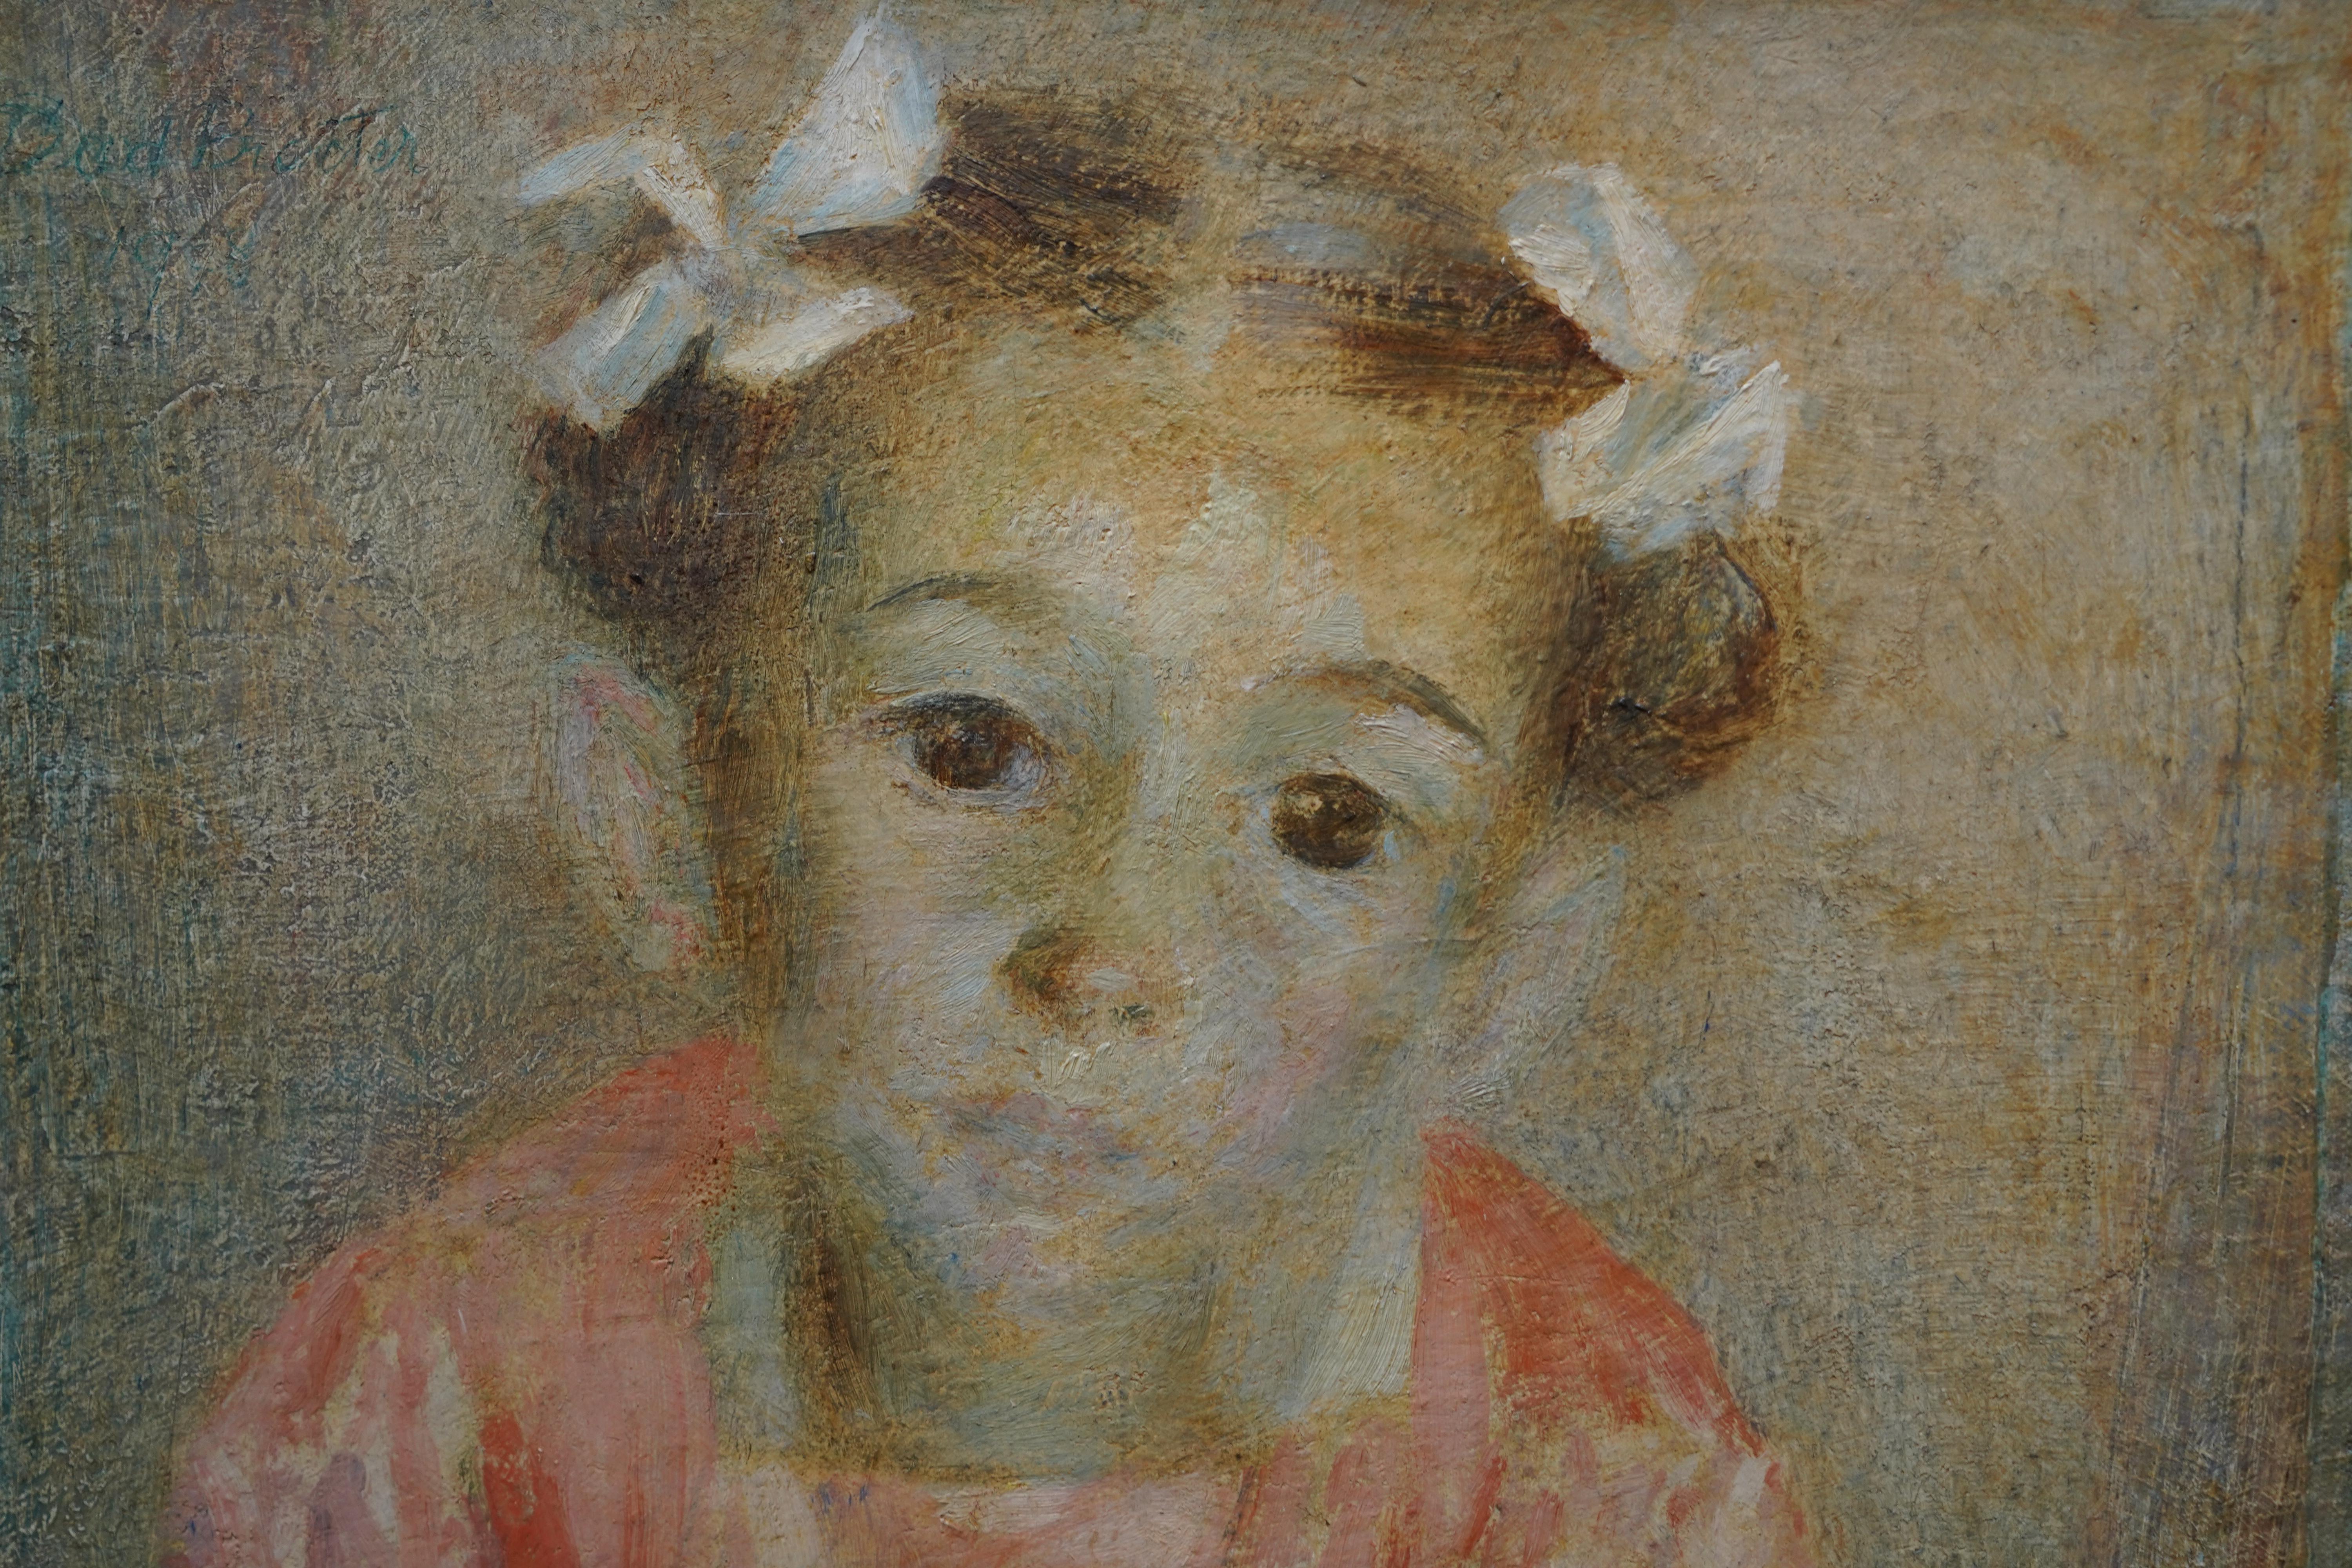 This charming British portrait oil painting is by female artist Dod Procter. It was painted in 1949 and exhibited at the Royal Academy London the same year. The painting is of a little girl in her peach party frock, bows in her hair. There is